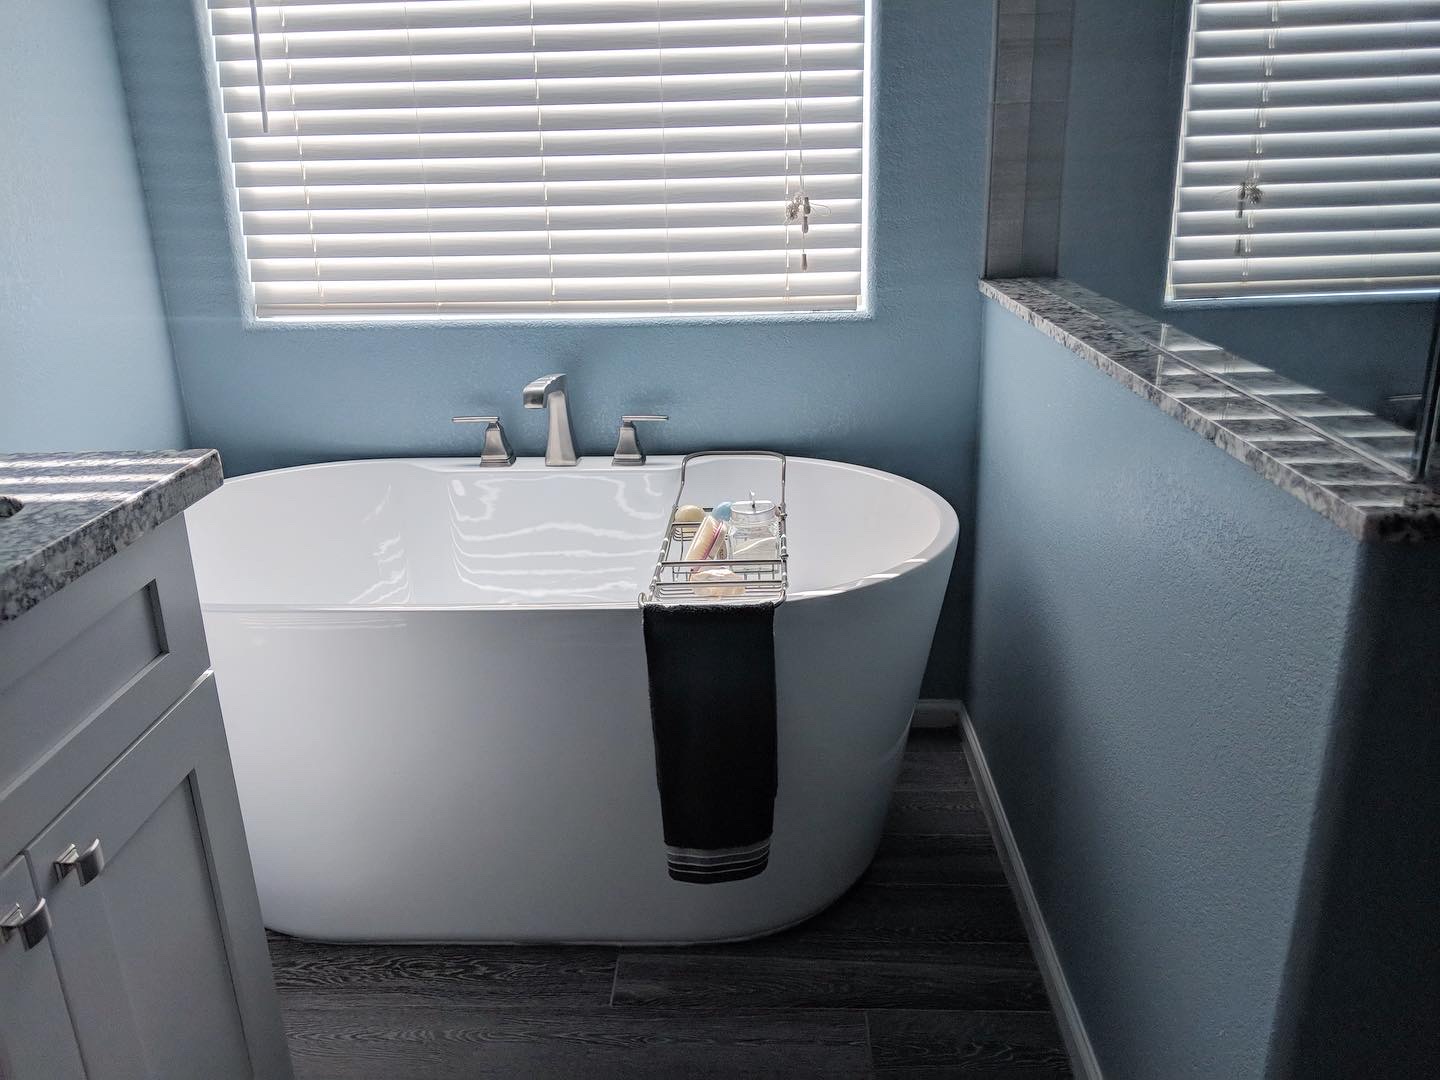 A bathroom with a tub and sink in it